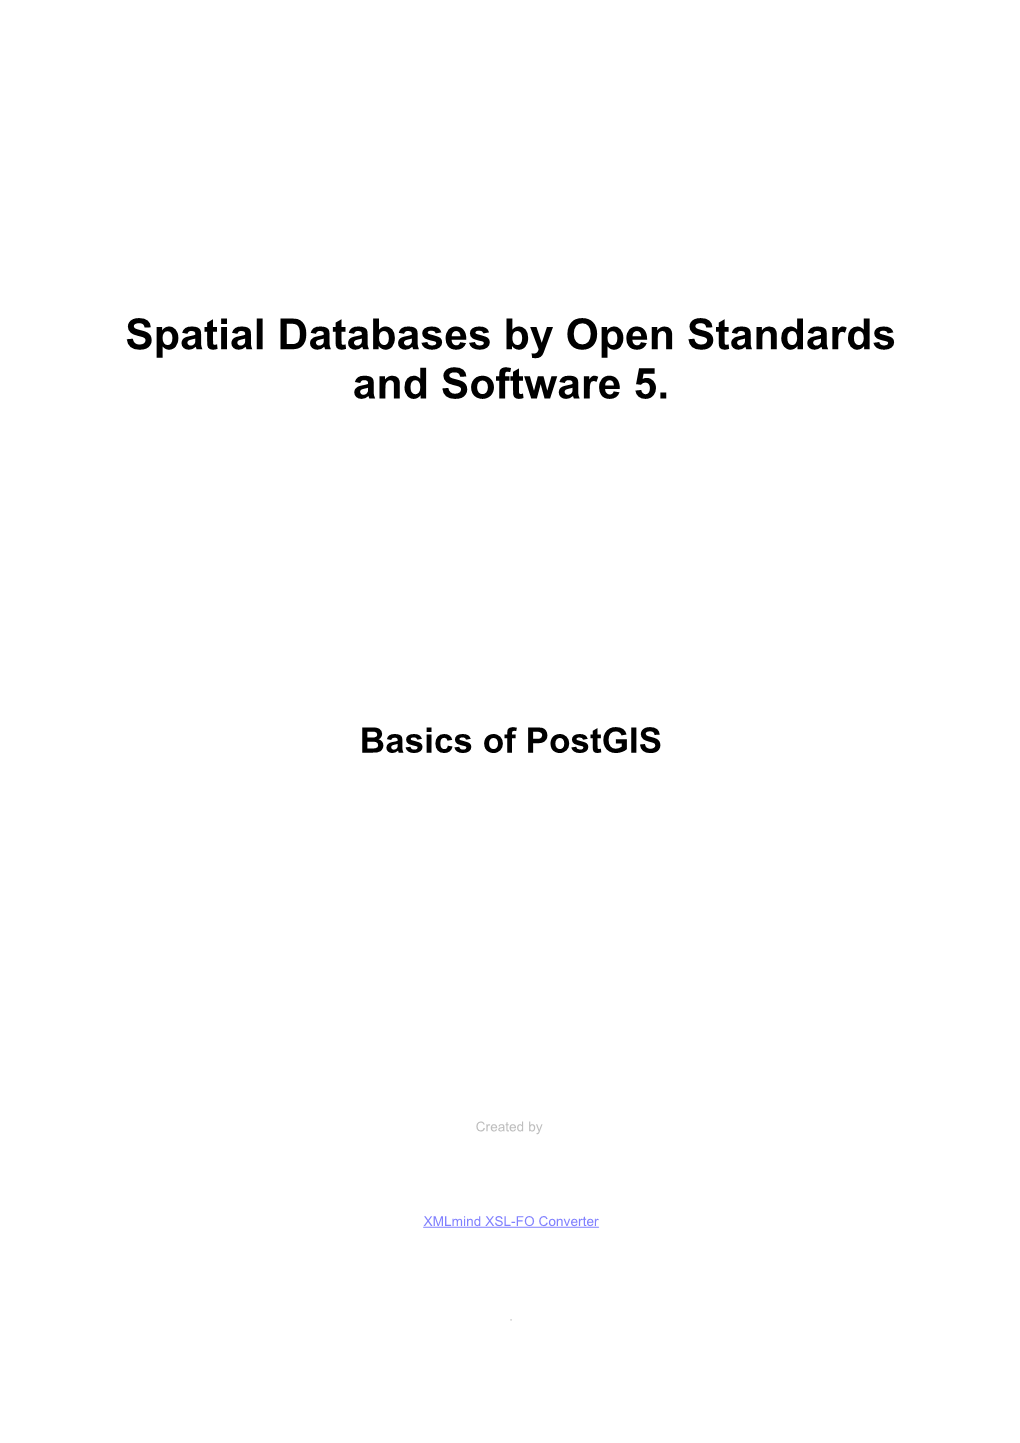 Spatial Databases by Open Standards and Software 5